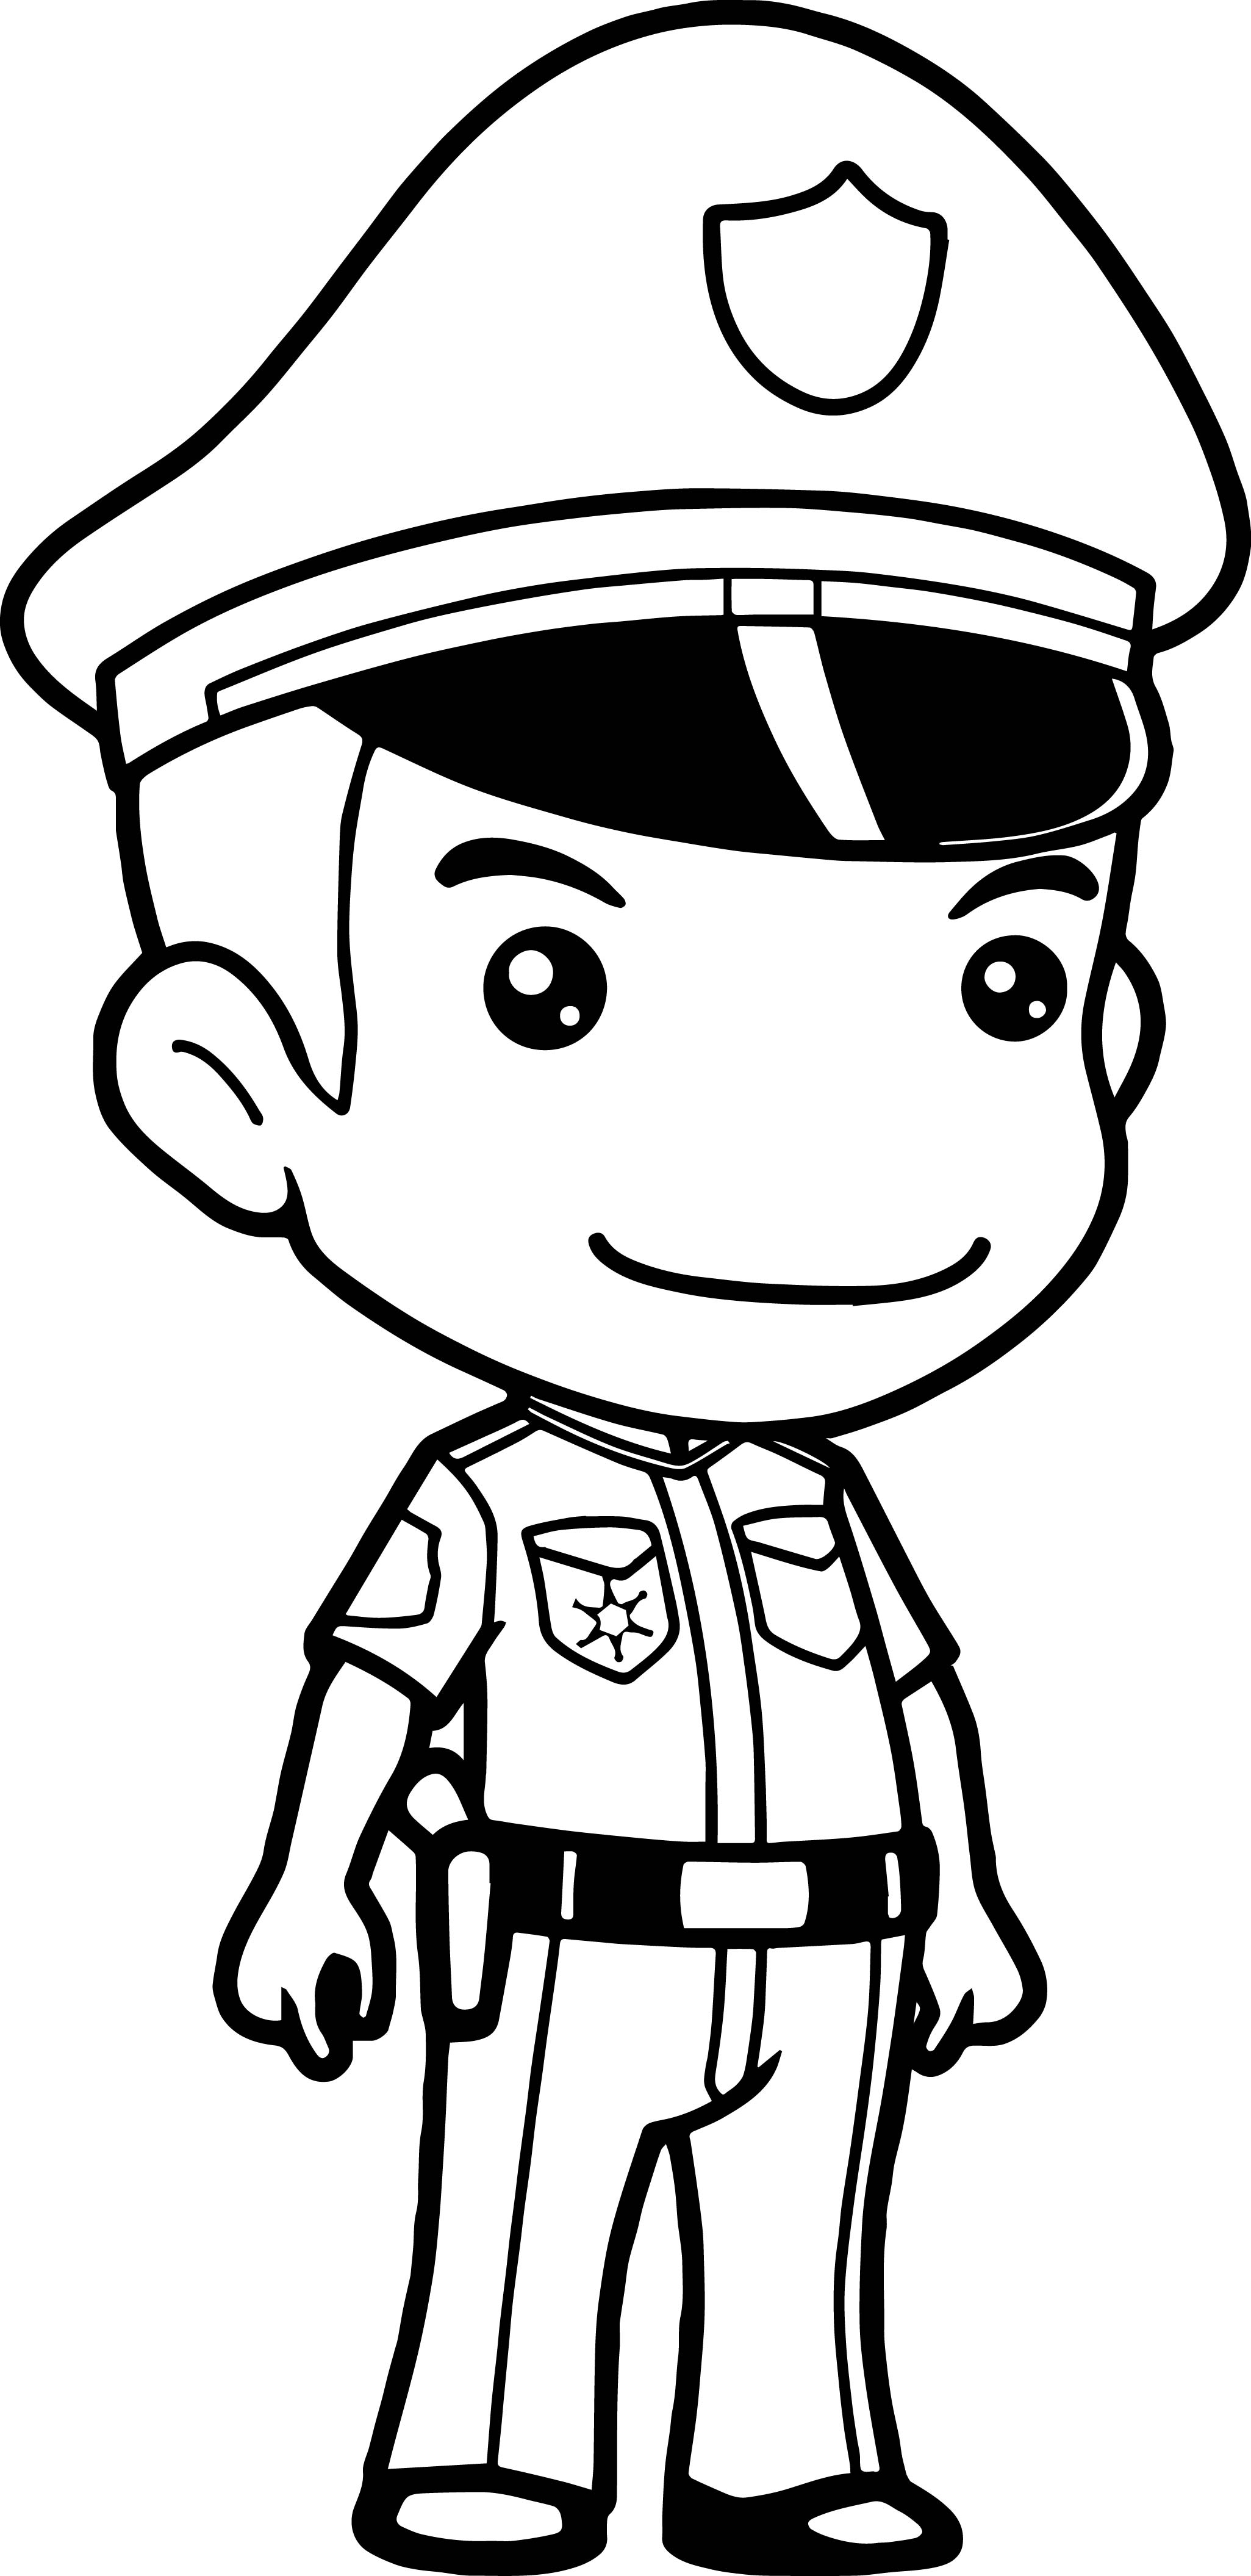 Law Enforcement Coloring Pages At GetColorings Free Printable Colorings Pages To Print And